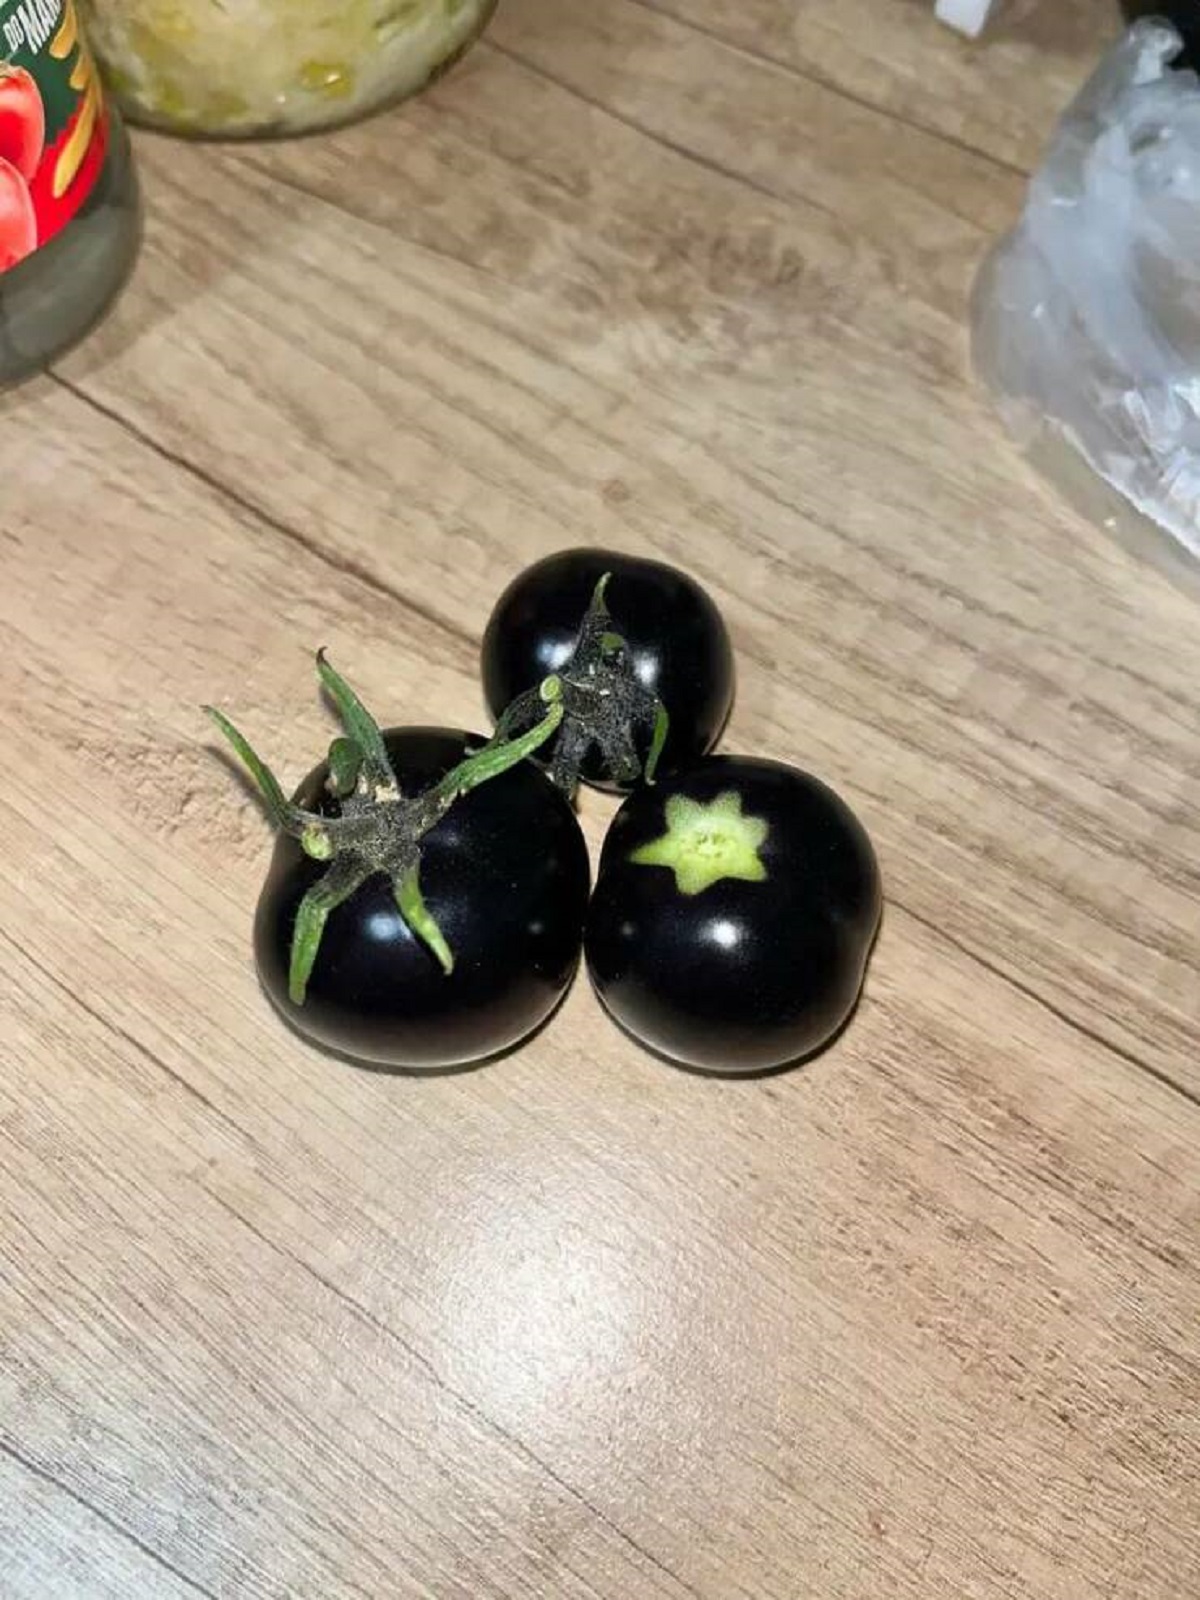 Black tomatoes exist:

It's a strain called "black beauty" and is apparently "rich, smooth, and savory with earthy tones."